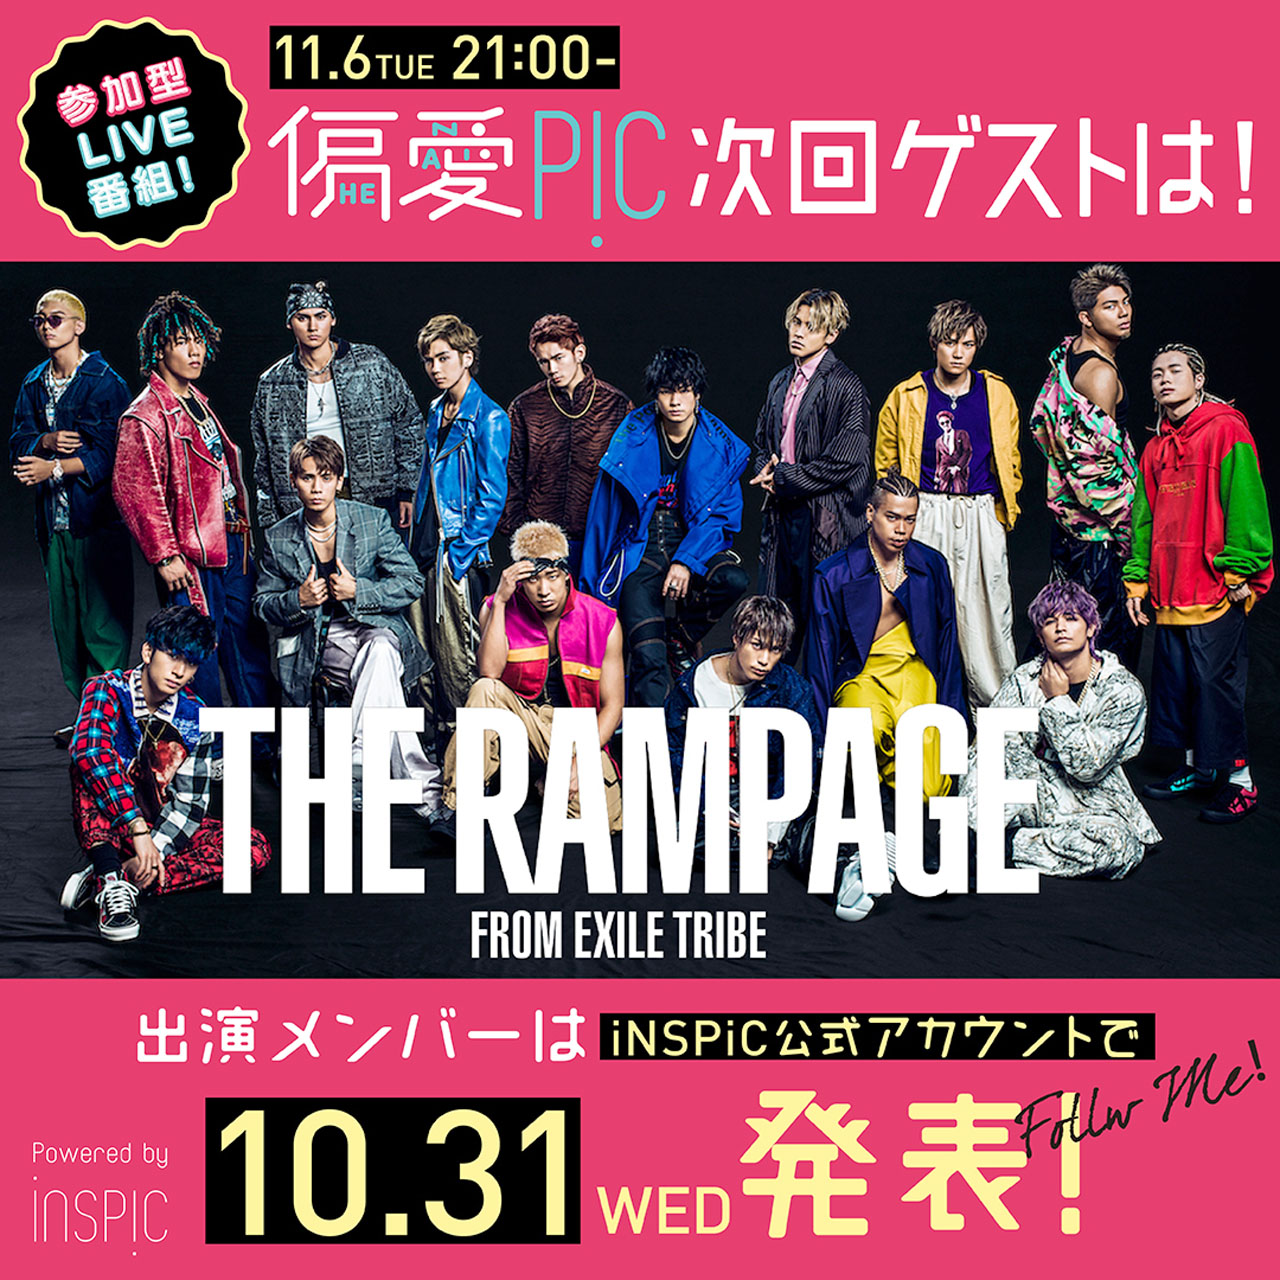 THE RAMPAGE from EXILE TRIBEが11月6日の生配信番組に出演決定！限定15組30名を観覧に招待